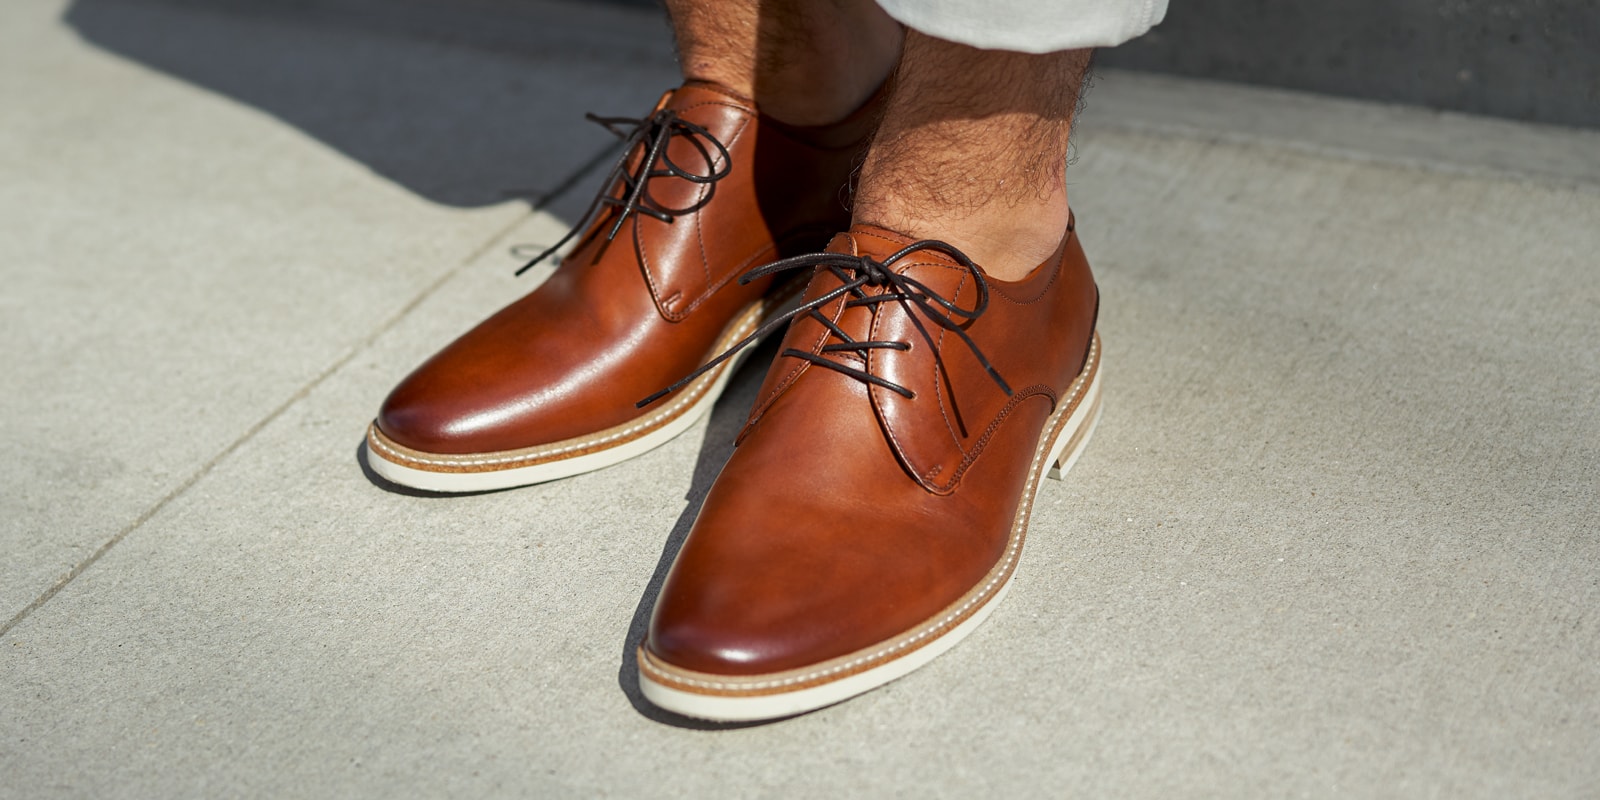 The featured product is the Highland Plain Toe Oxford in Cognac.